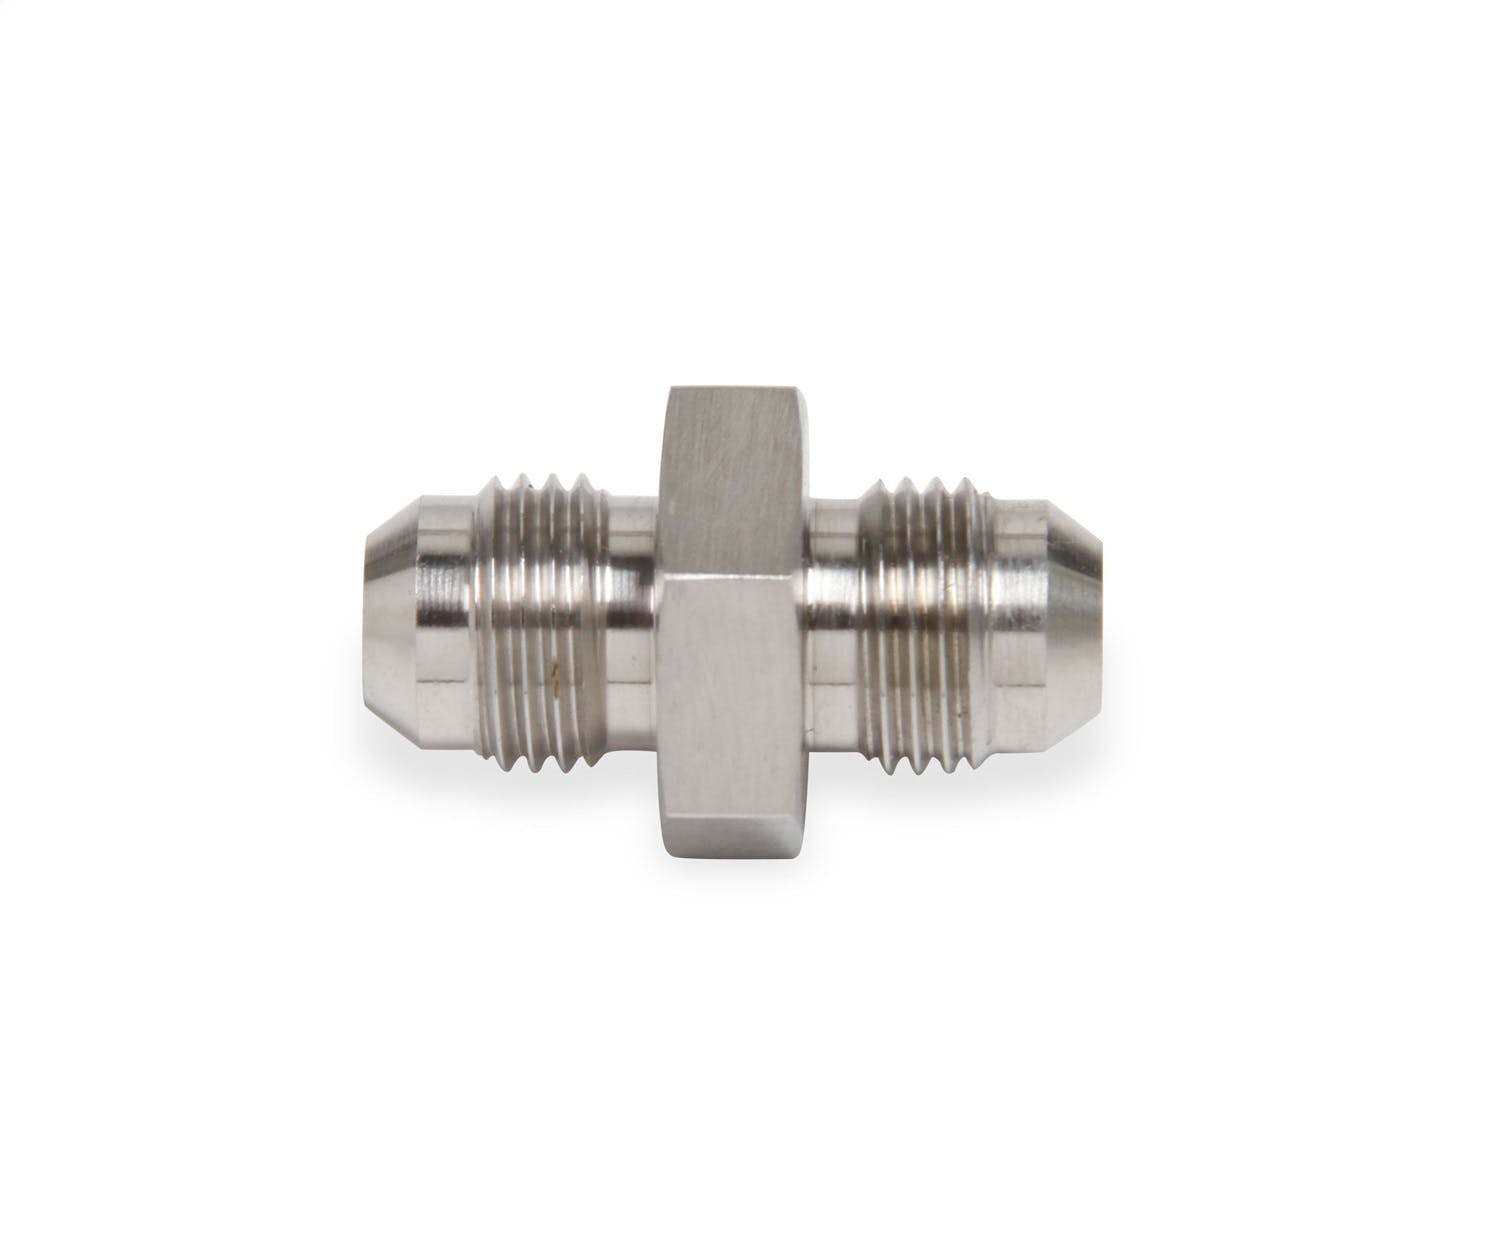 Earl's Performance Plumbing SS981506ERL -6 UNION STAINLESS STEEL